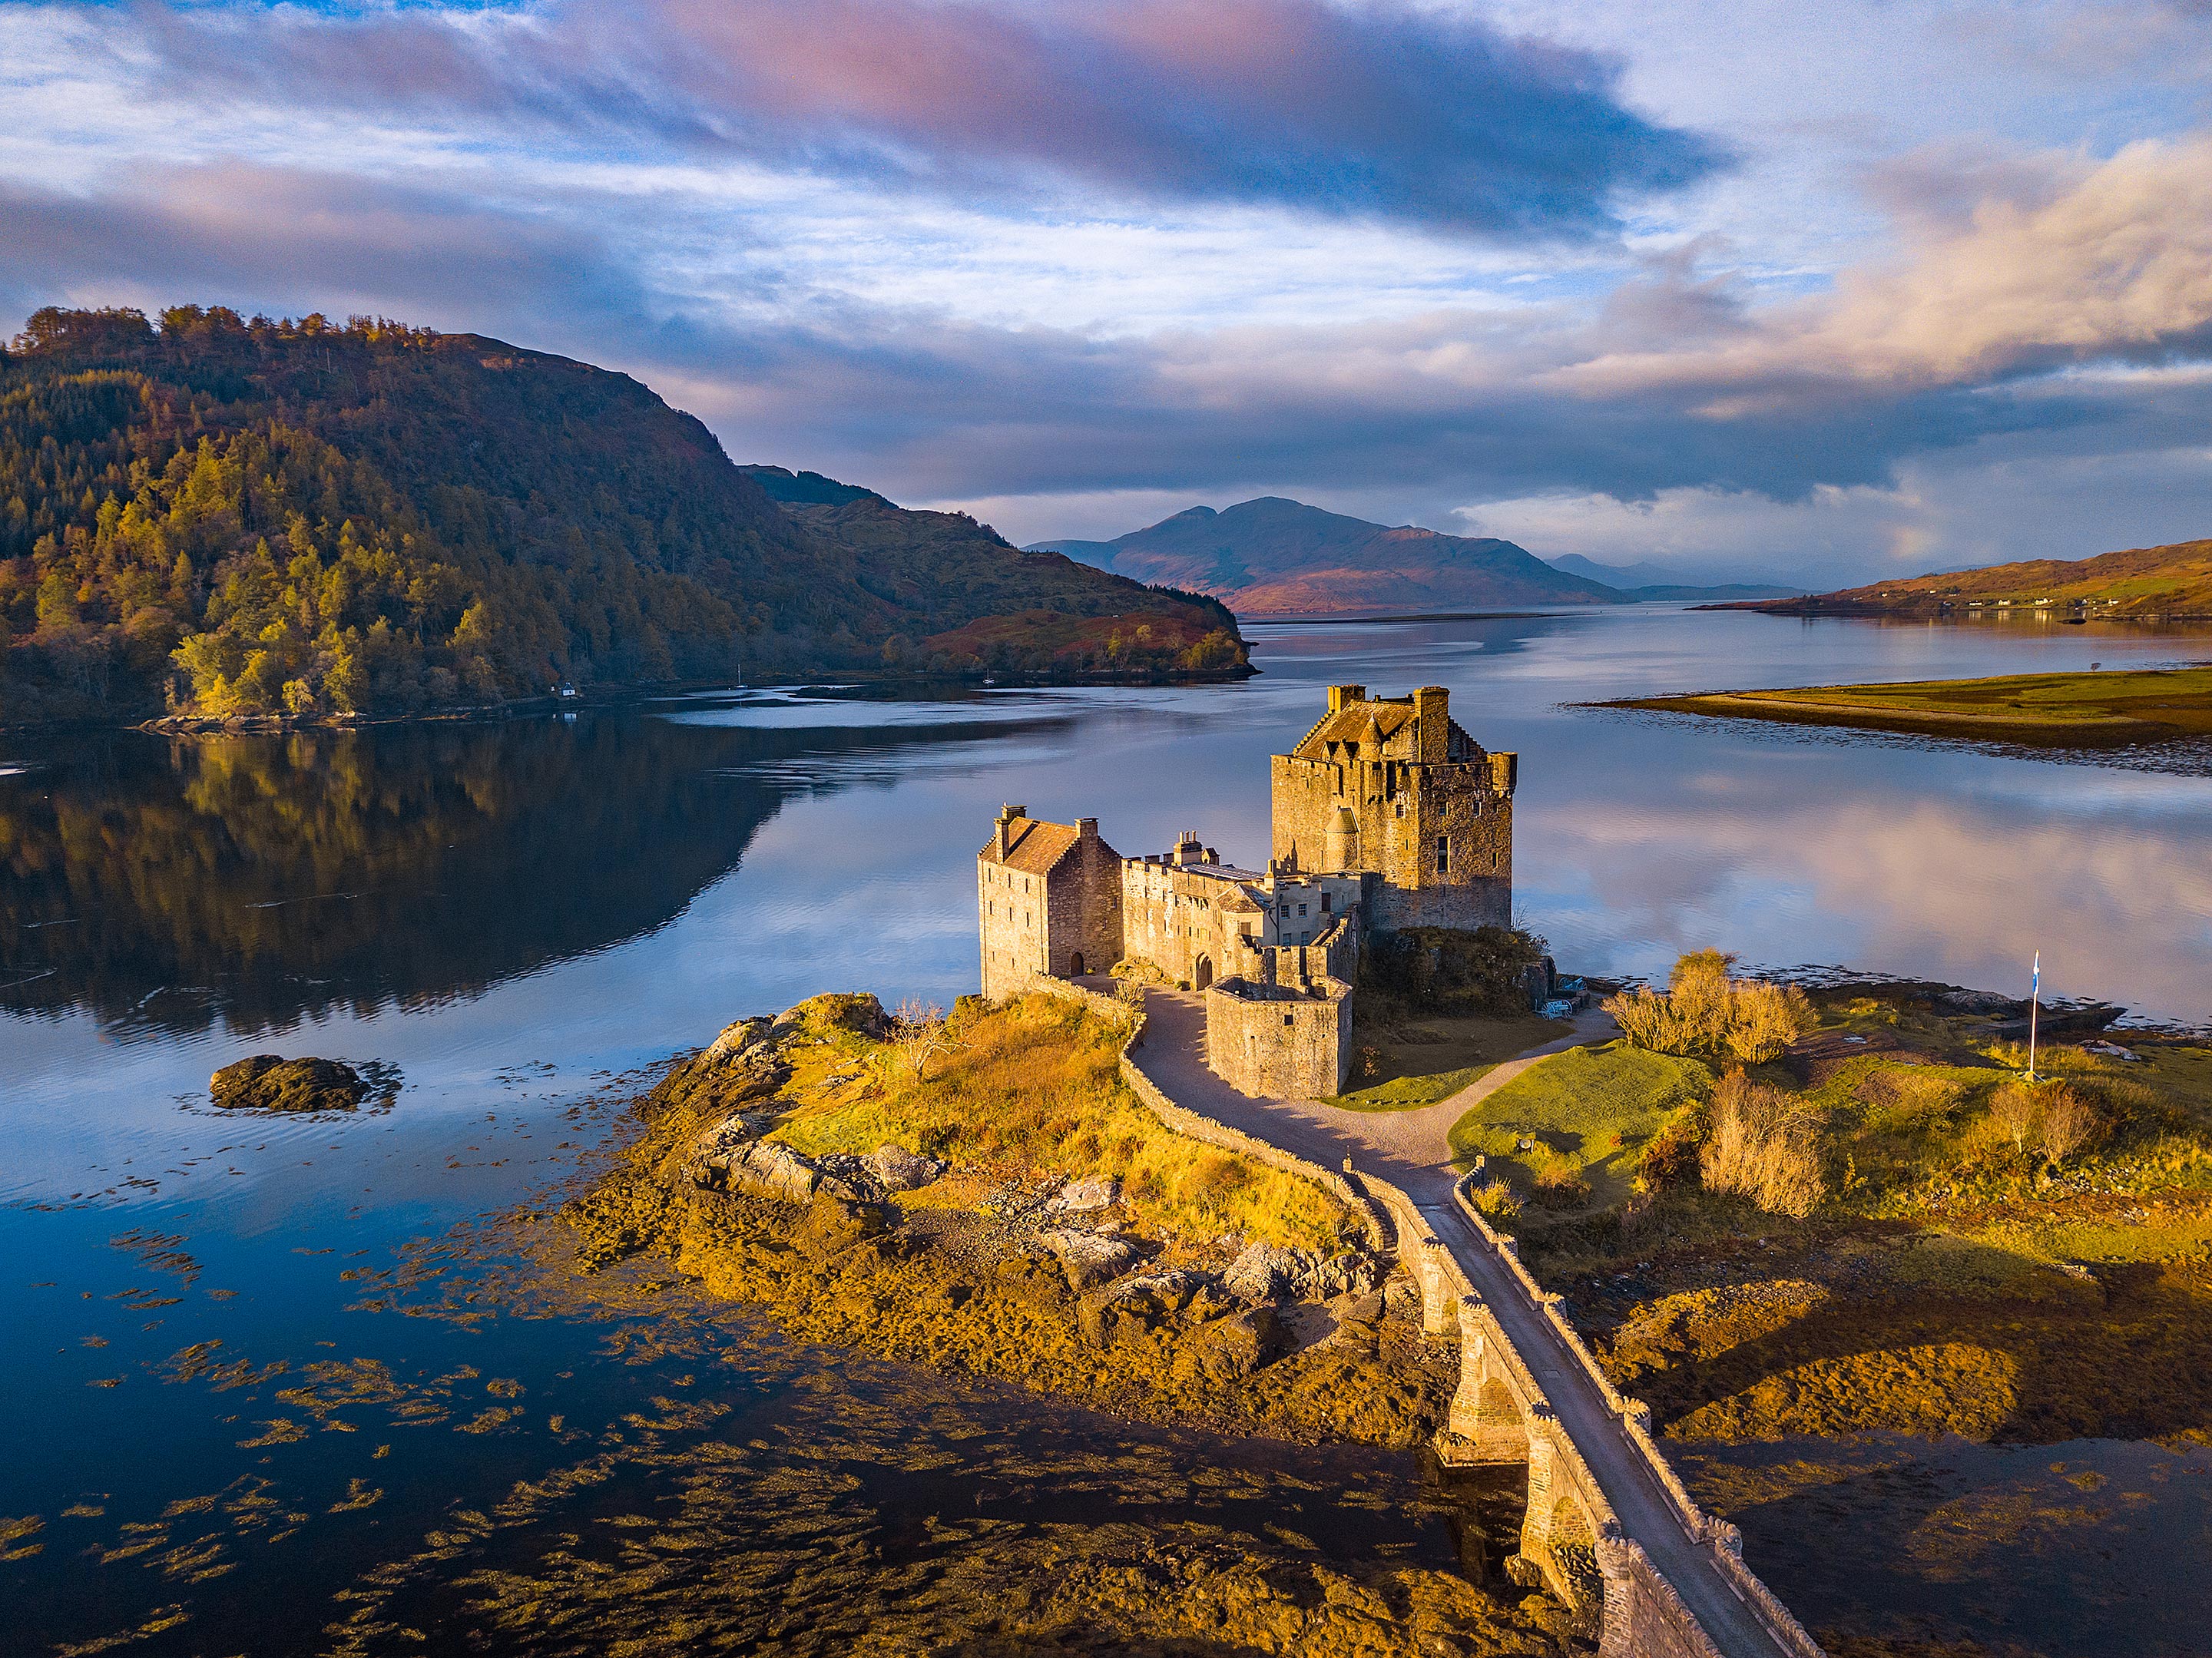 must visit places in england and scotland